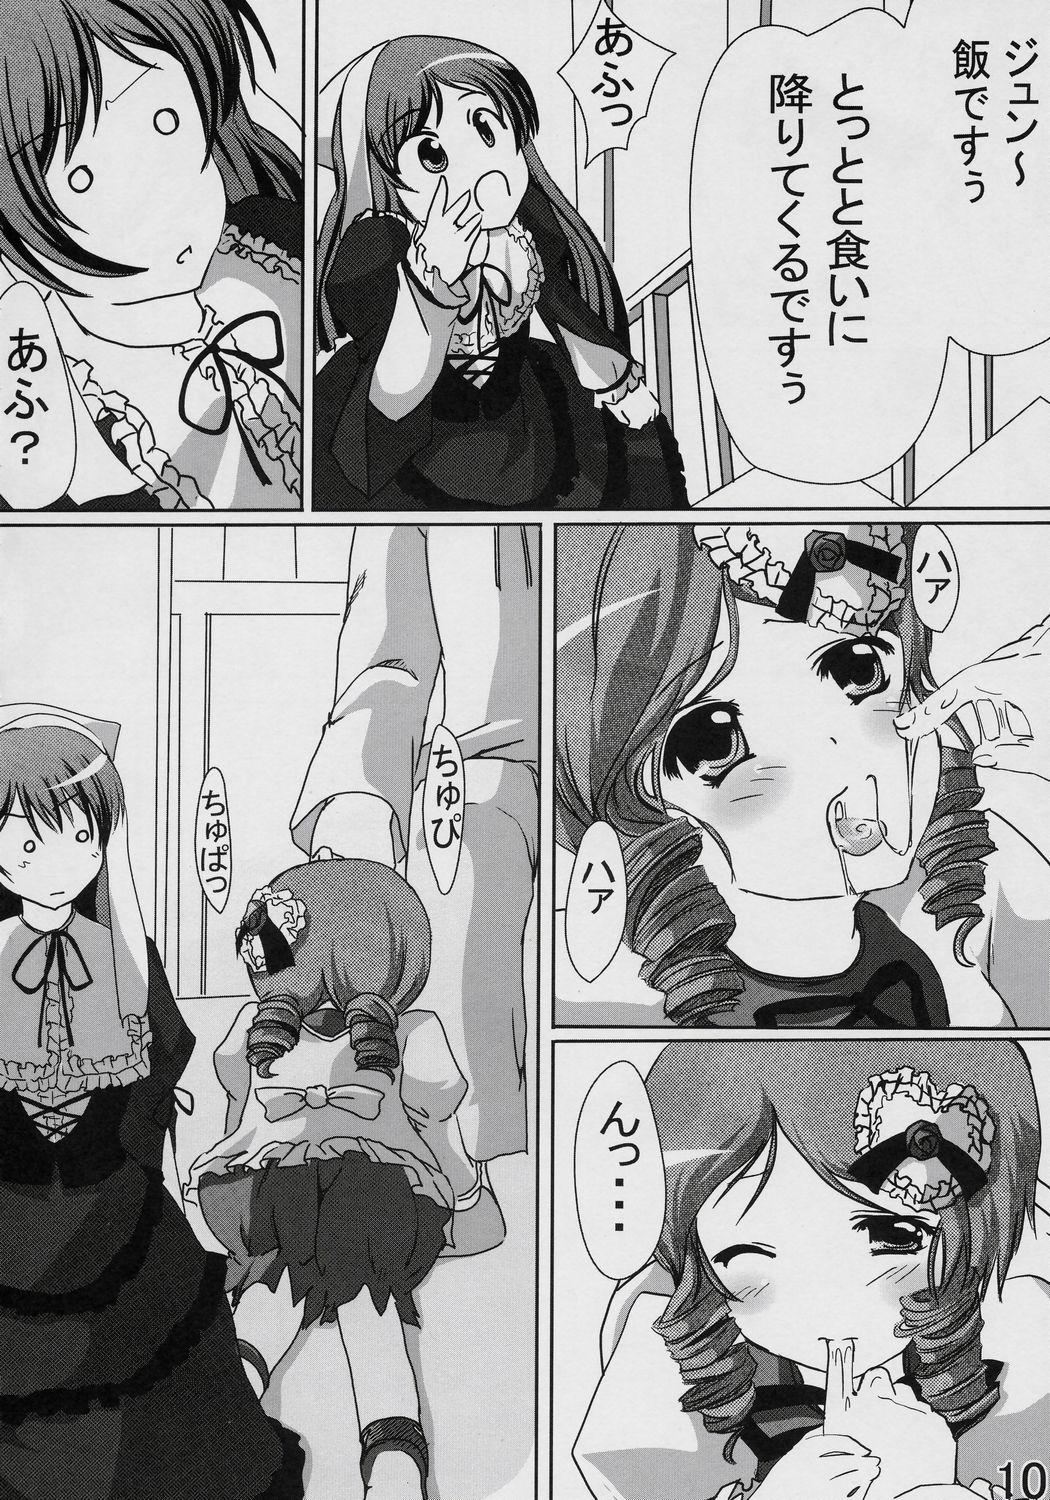 Maid Citron - Rozen maiden Gaping - Page 9